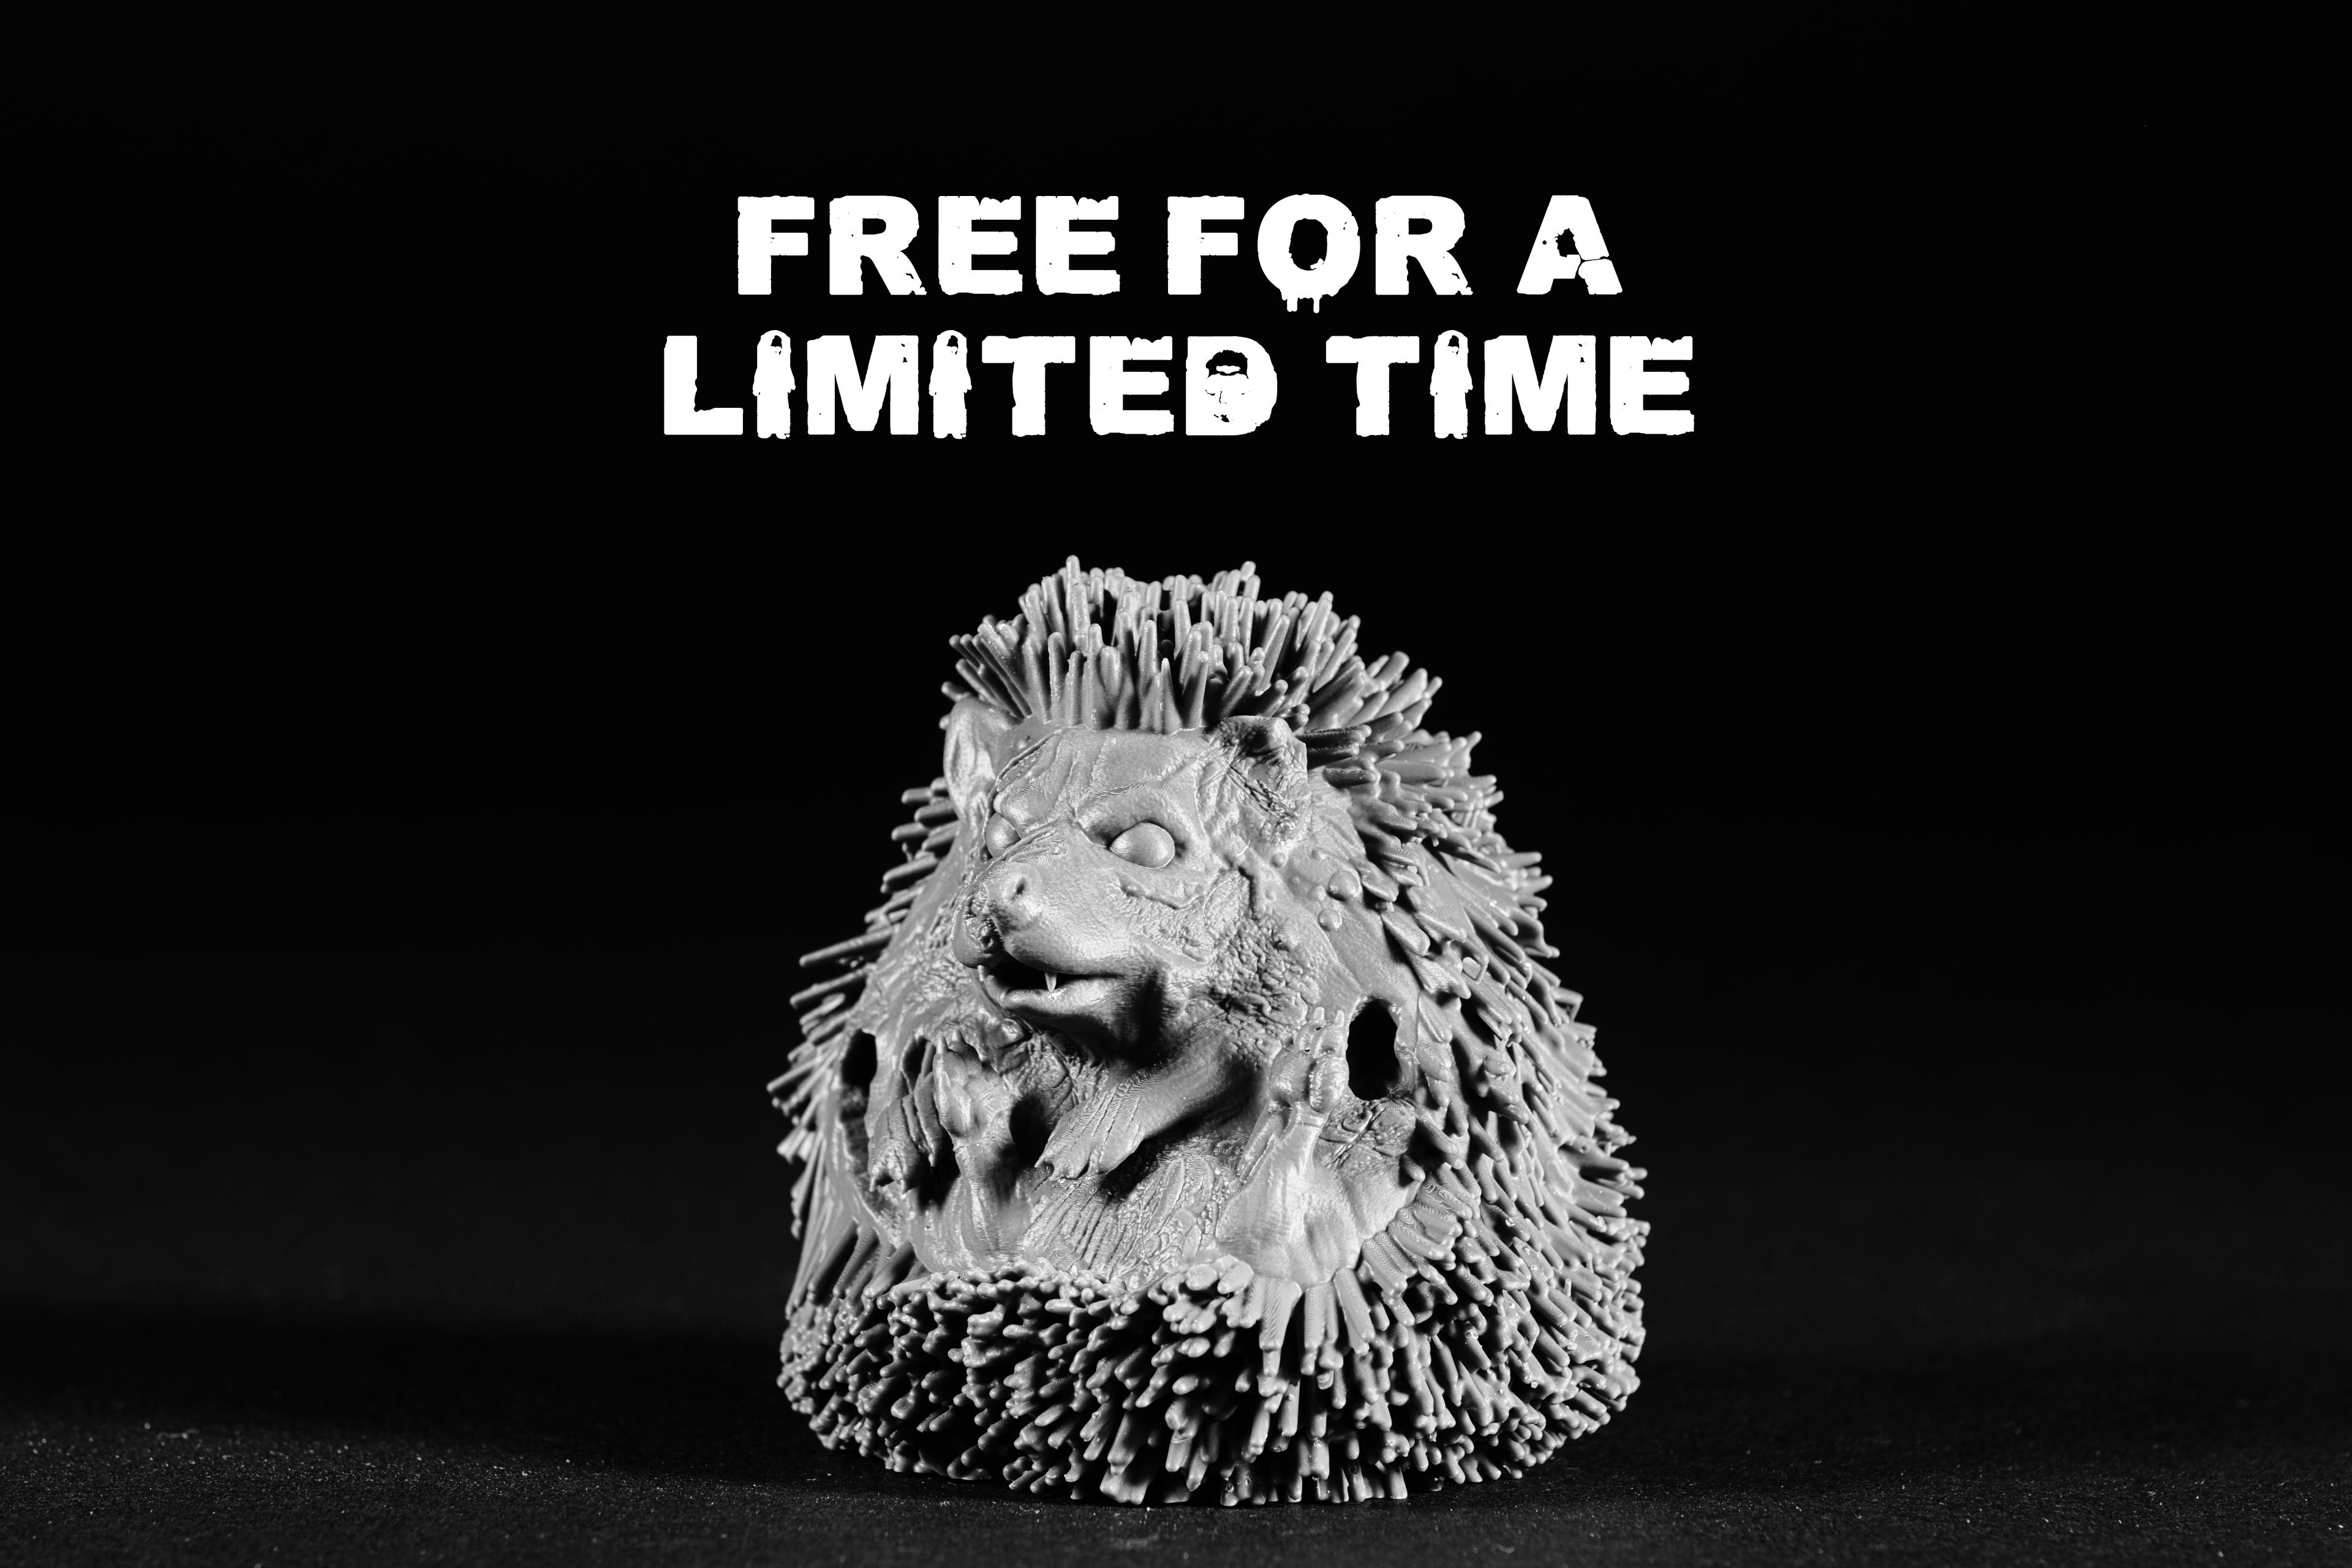 Zombie_Hedgehog (Pre Supported) FREE FOR LIMITED TIME 3d model